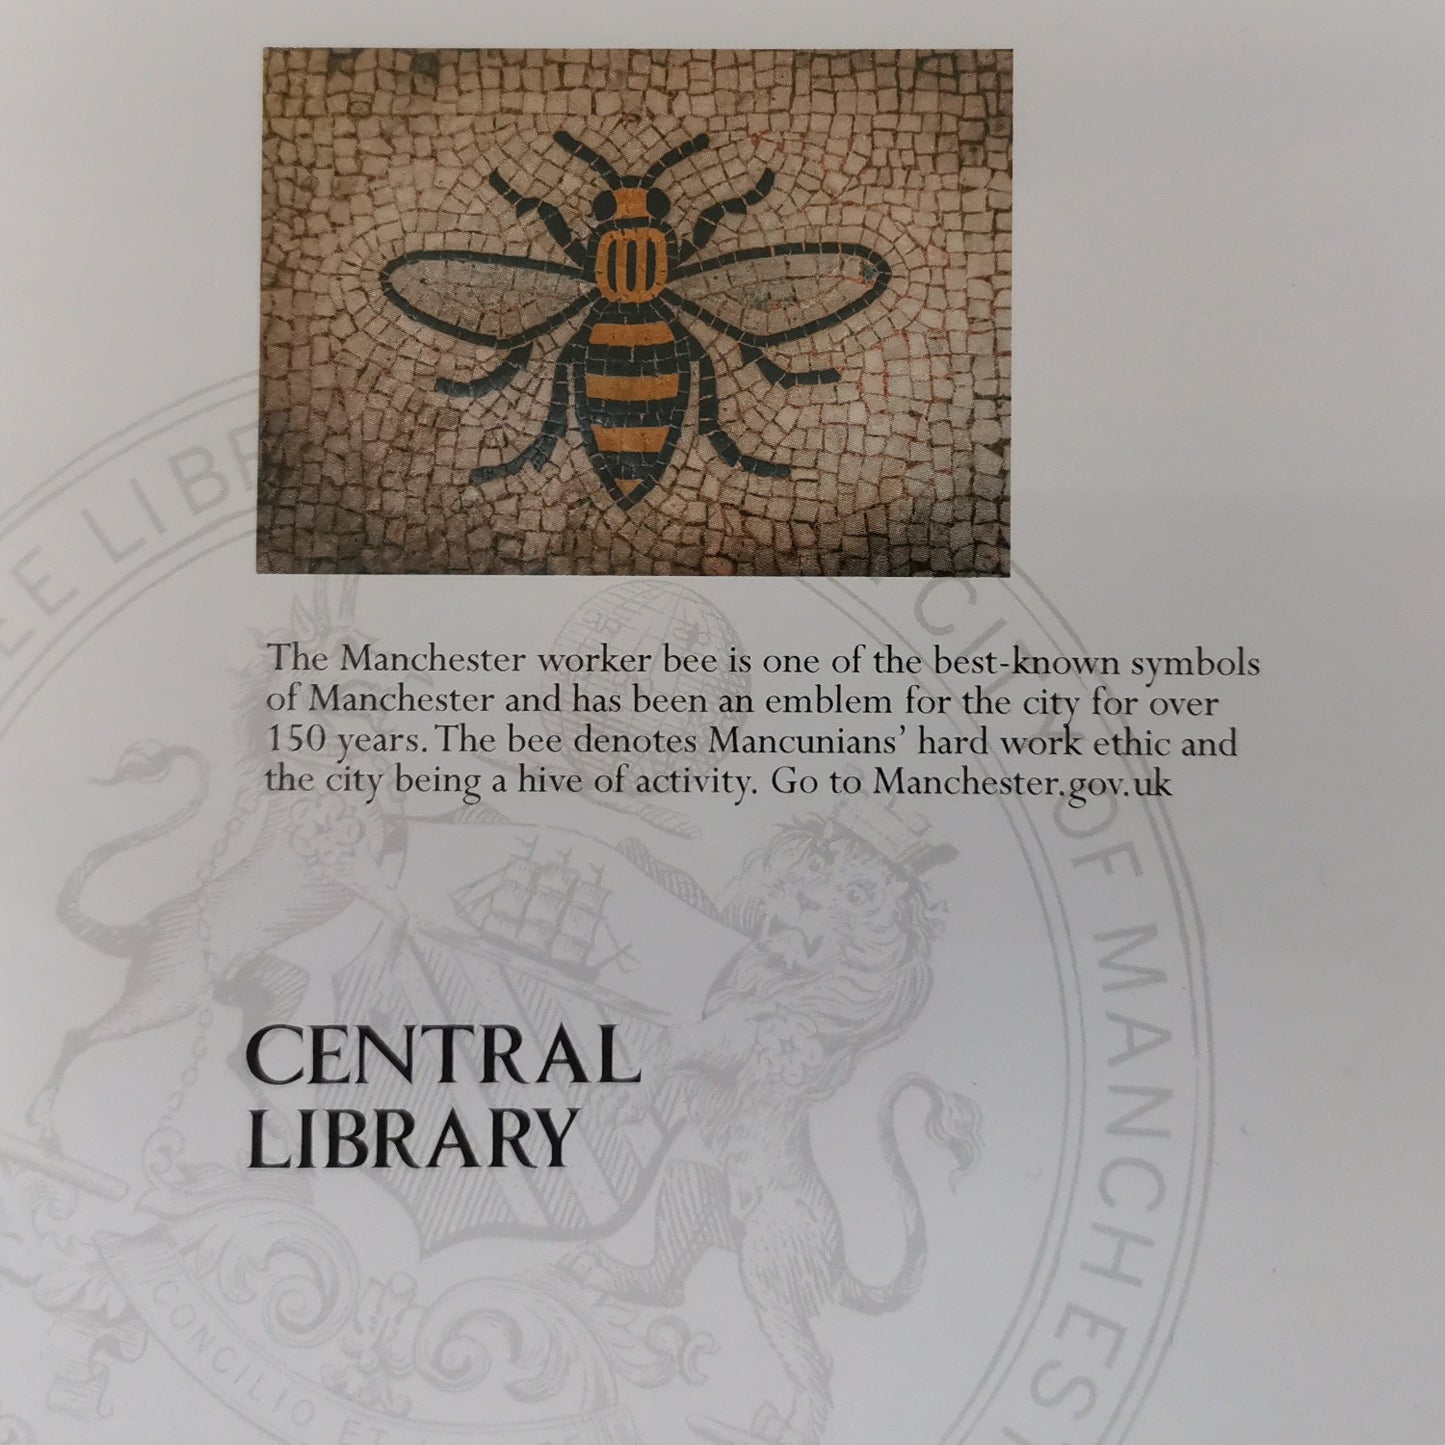 The Manchester worker bee image with text showing that the bee has been a symbol of Manchester for over 150 years.